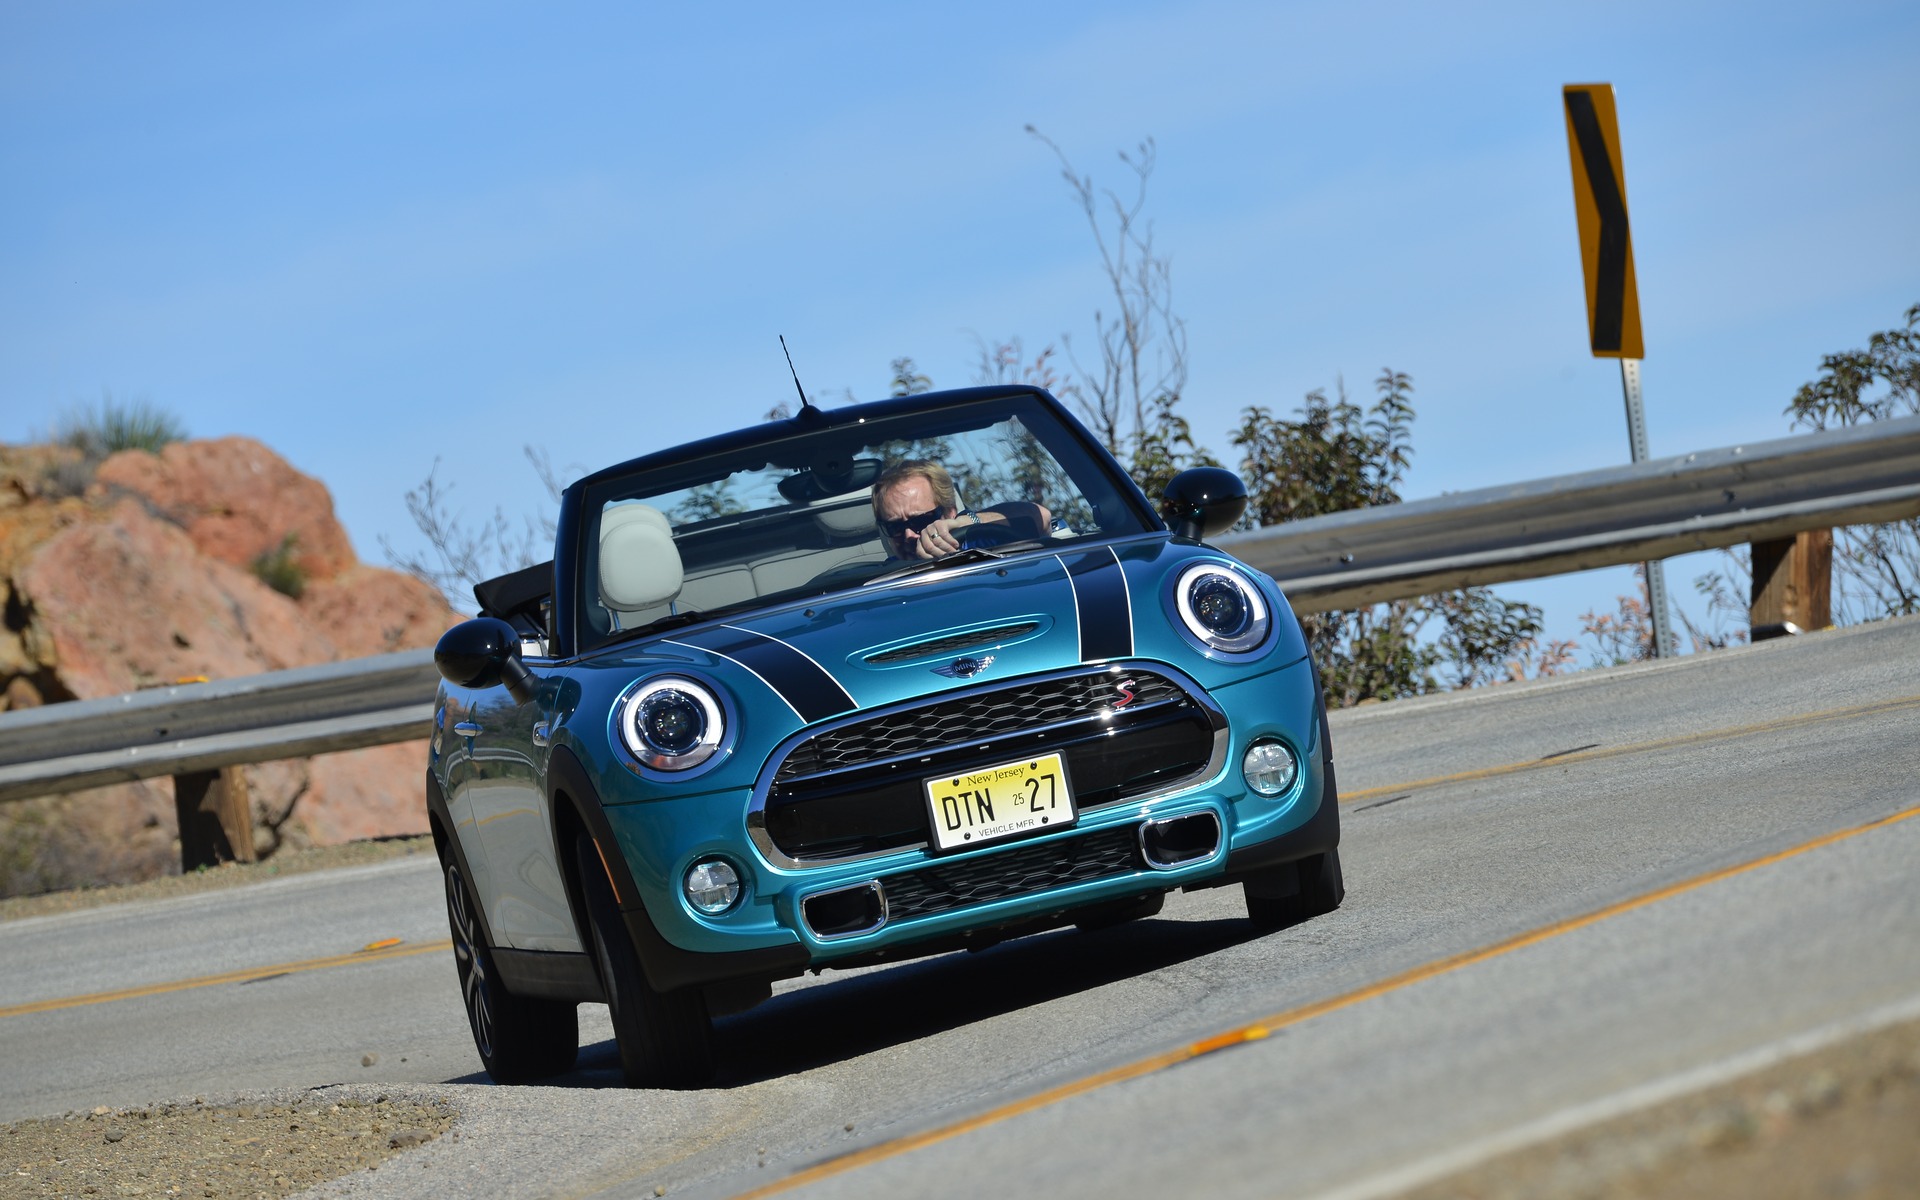 2016 MINI Cooper S Convertible: Another Reason to Hate Winter - The Car  Guide